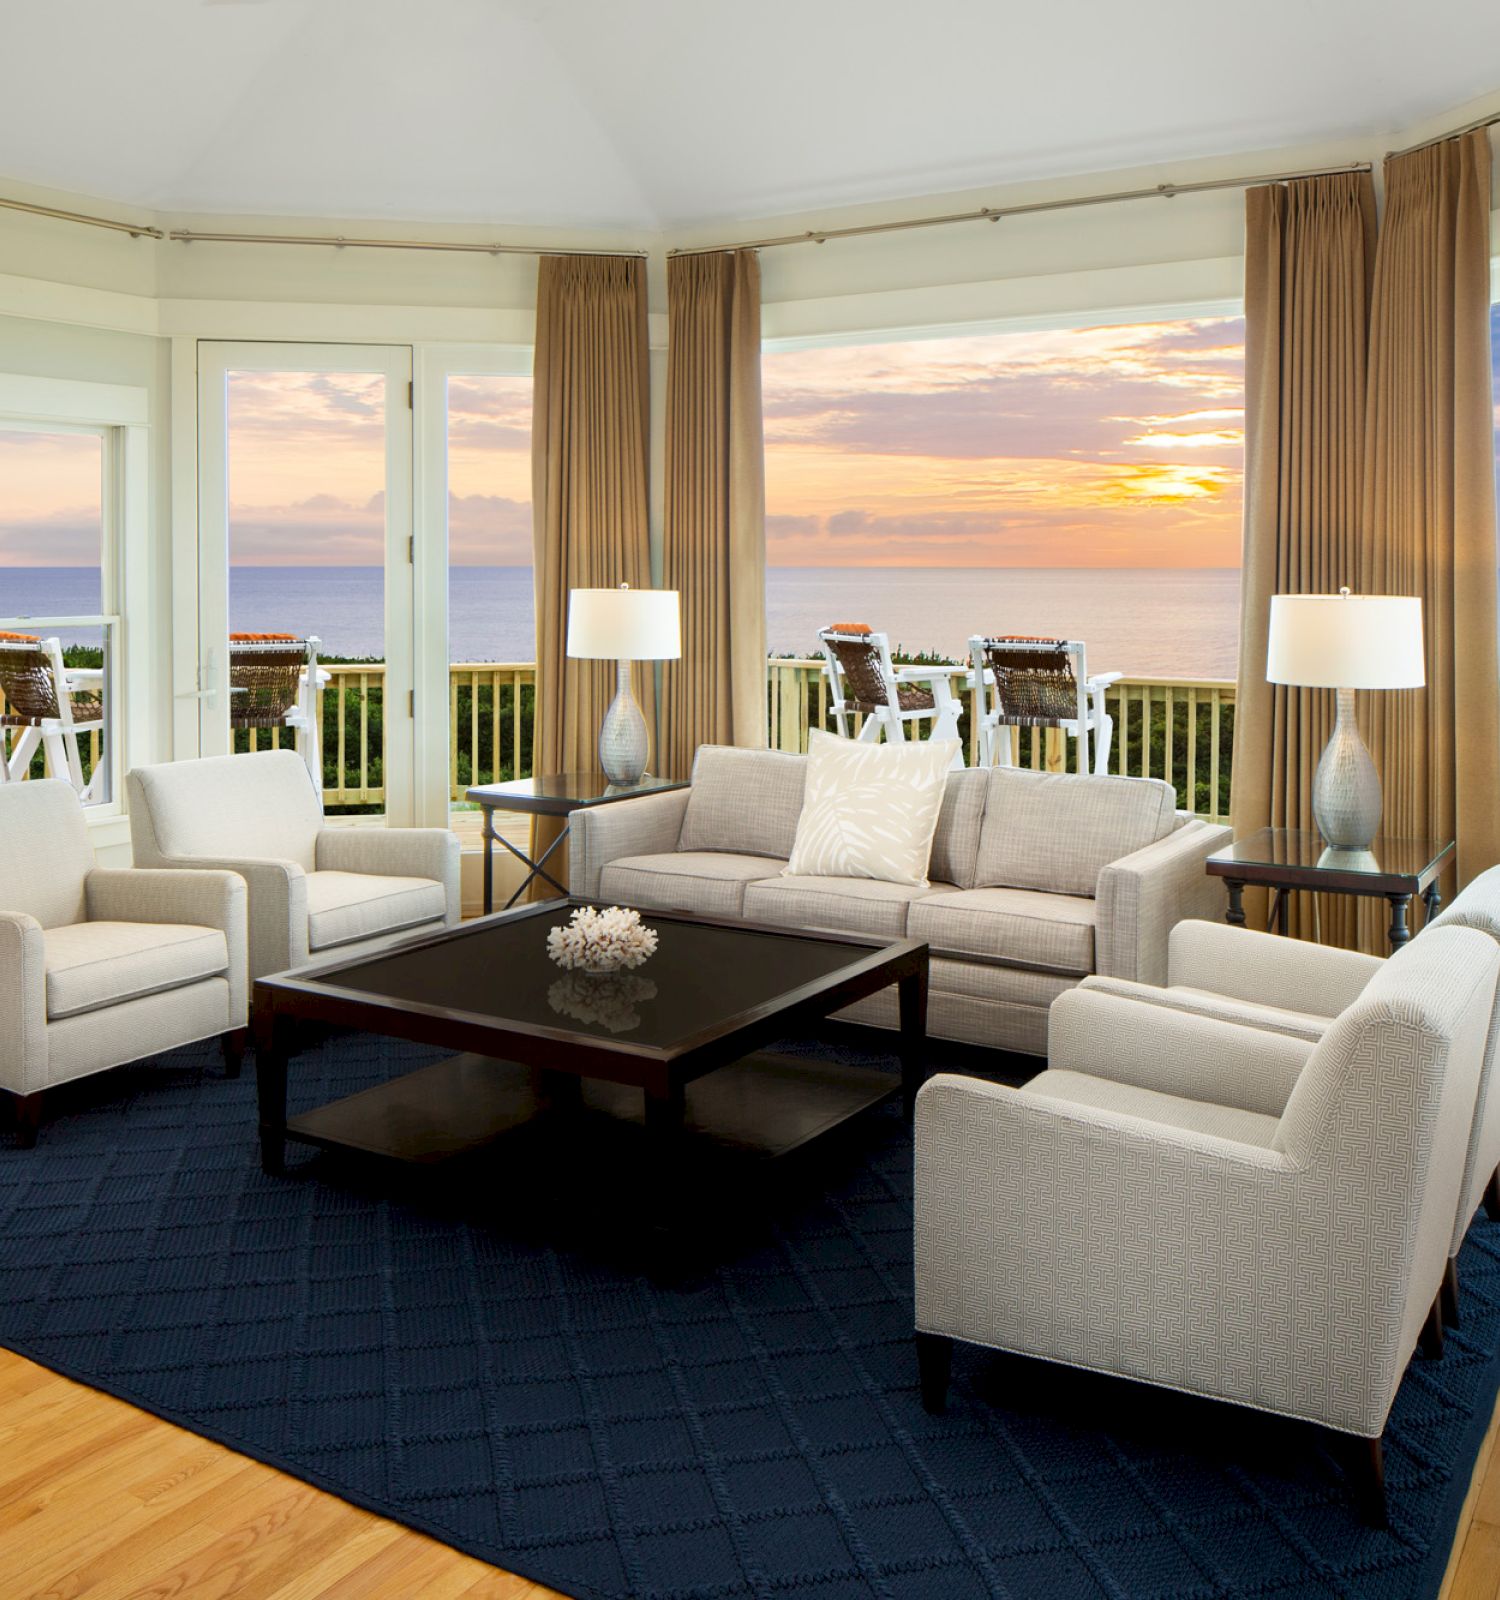 This image shows a modern living room with white furniture, a black coffee table, large windows, and a view of the sunset over the ocean.